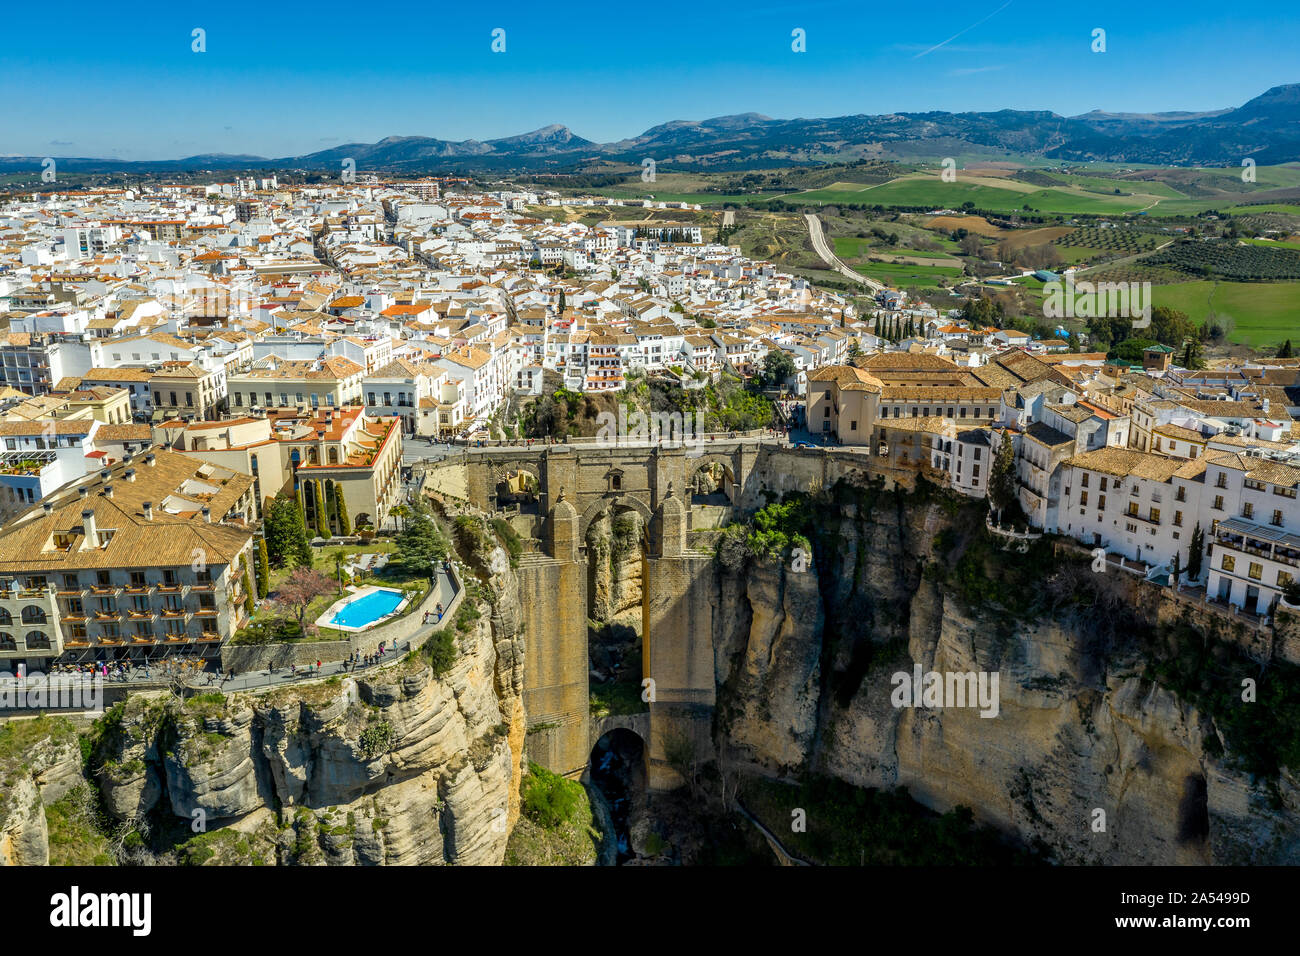 Ronda Spain aerial view of medieval hilltop town surrounded by walls and towers with famous bridge over gorge Stock Photo